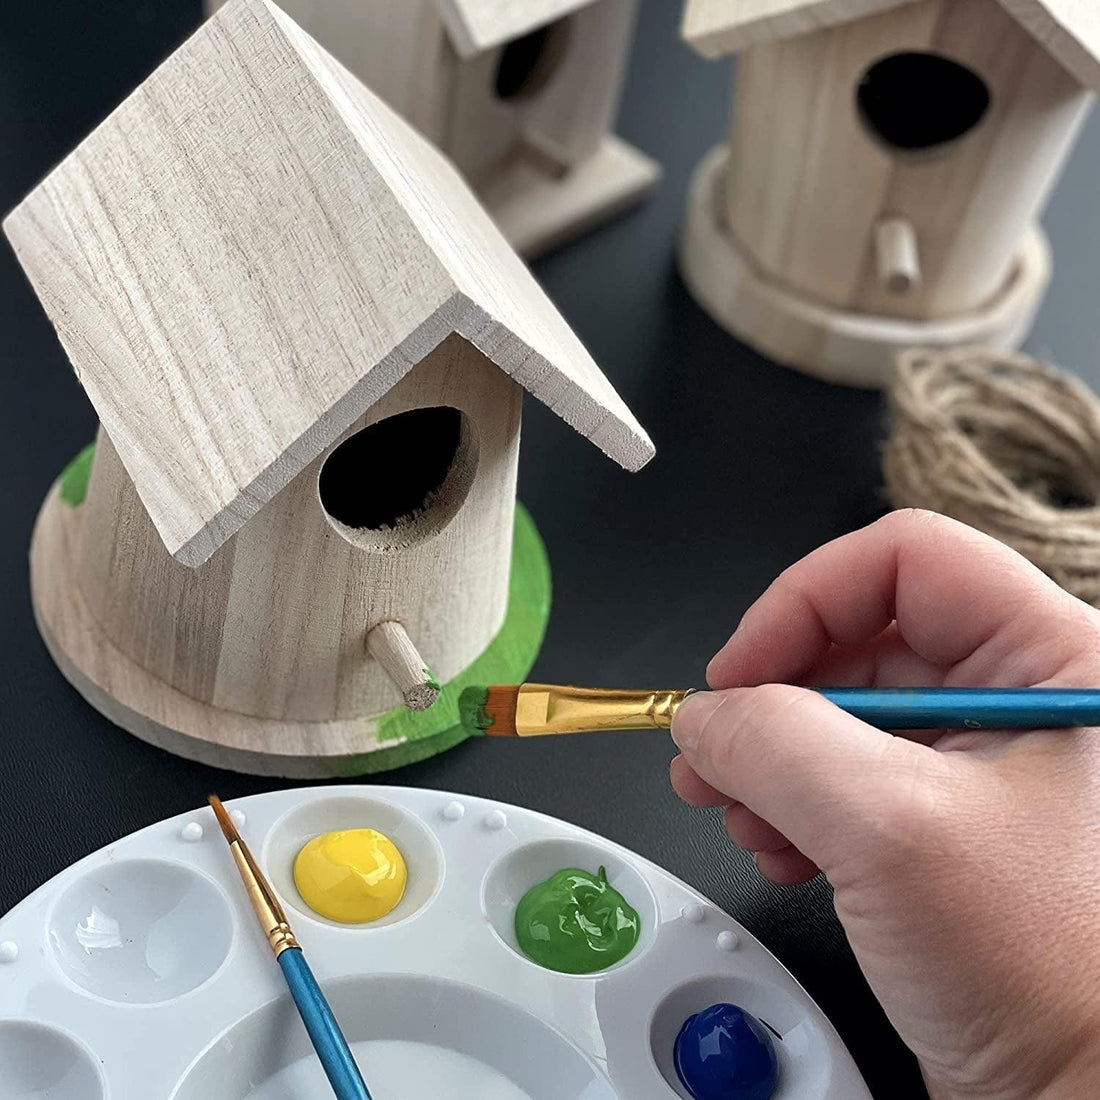 10 Tips to know before creating your own DIY Wooden Birdhouse - WoodArtSupply